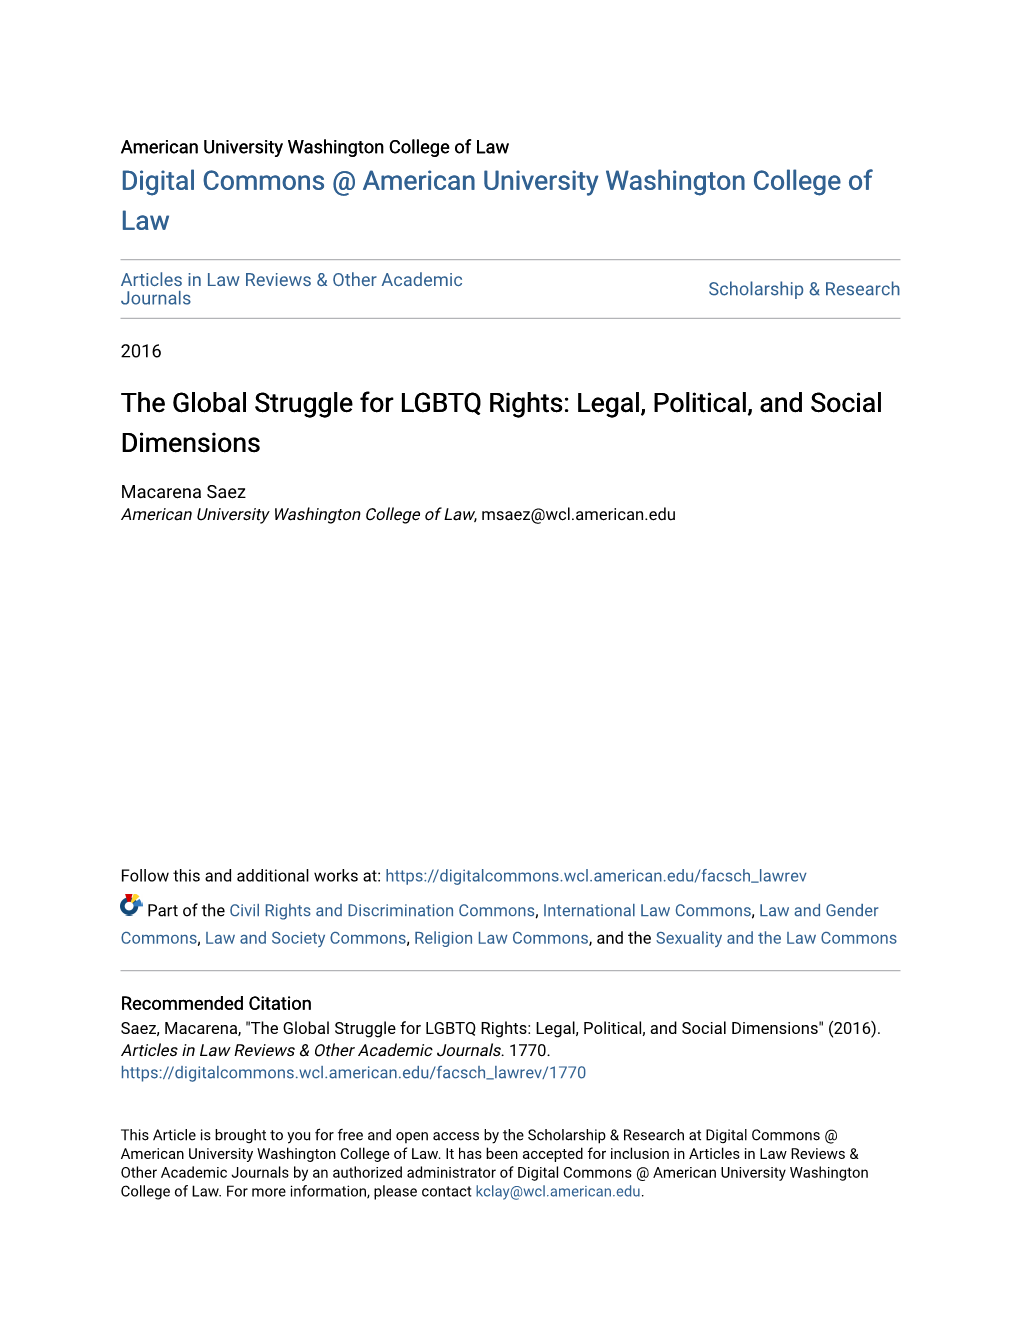 The Global Struggle for LGBTQ Rights: Legal, Political, and Social Dimensions